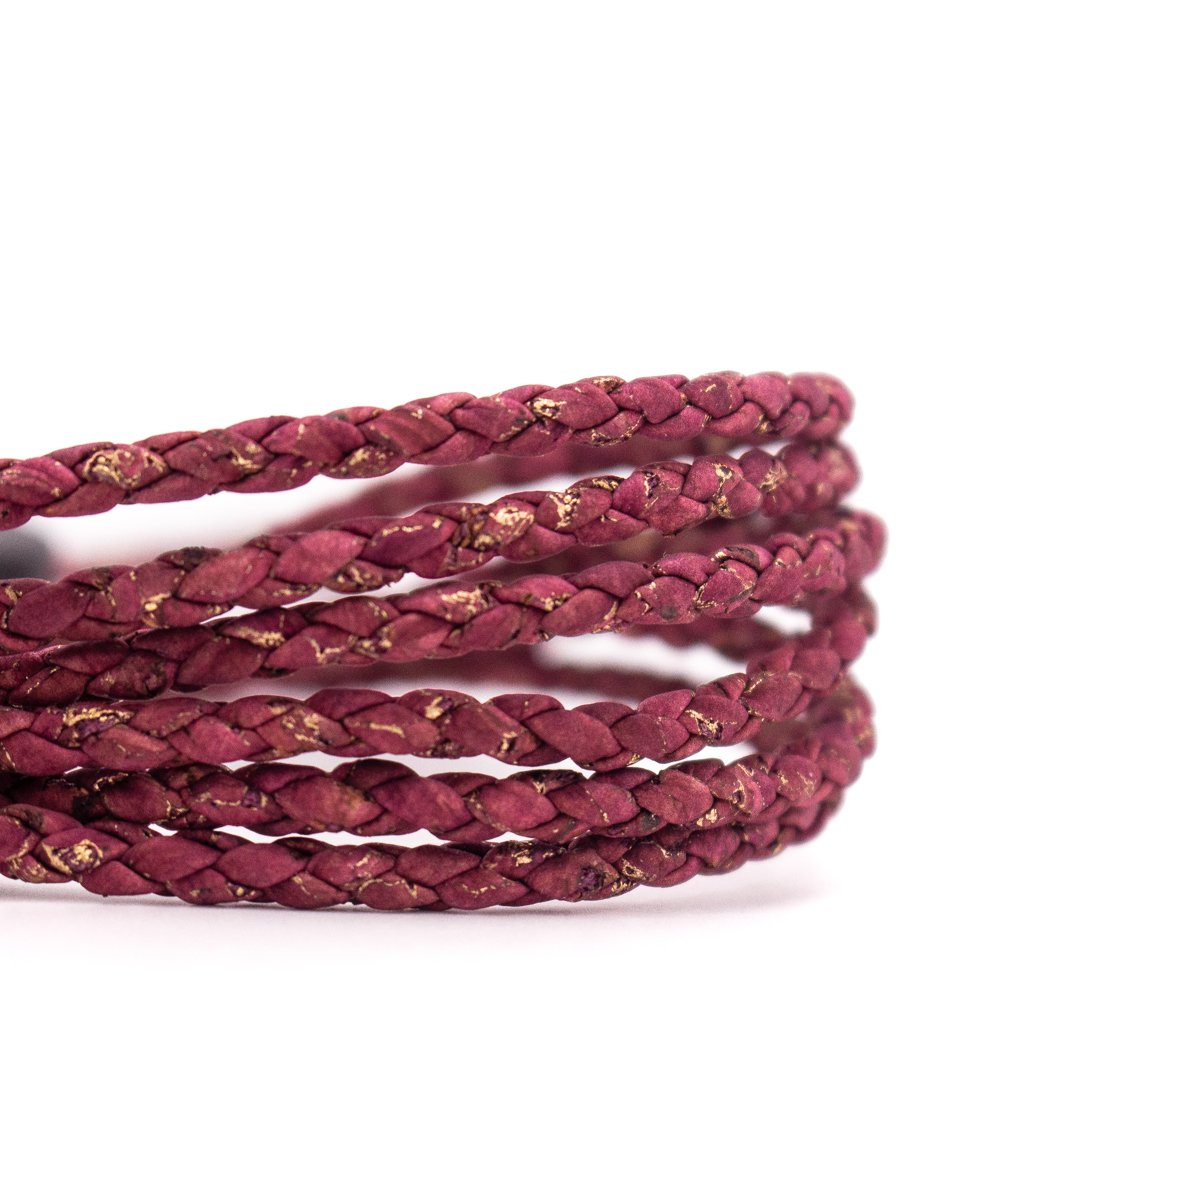 10 meters of Wine Red w/ Gold Braided 3mm Round Cork Cord COR-394